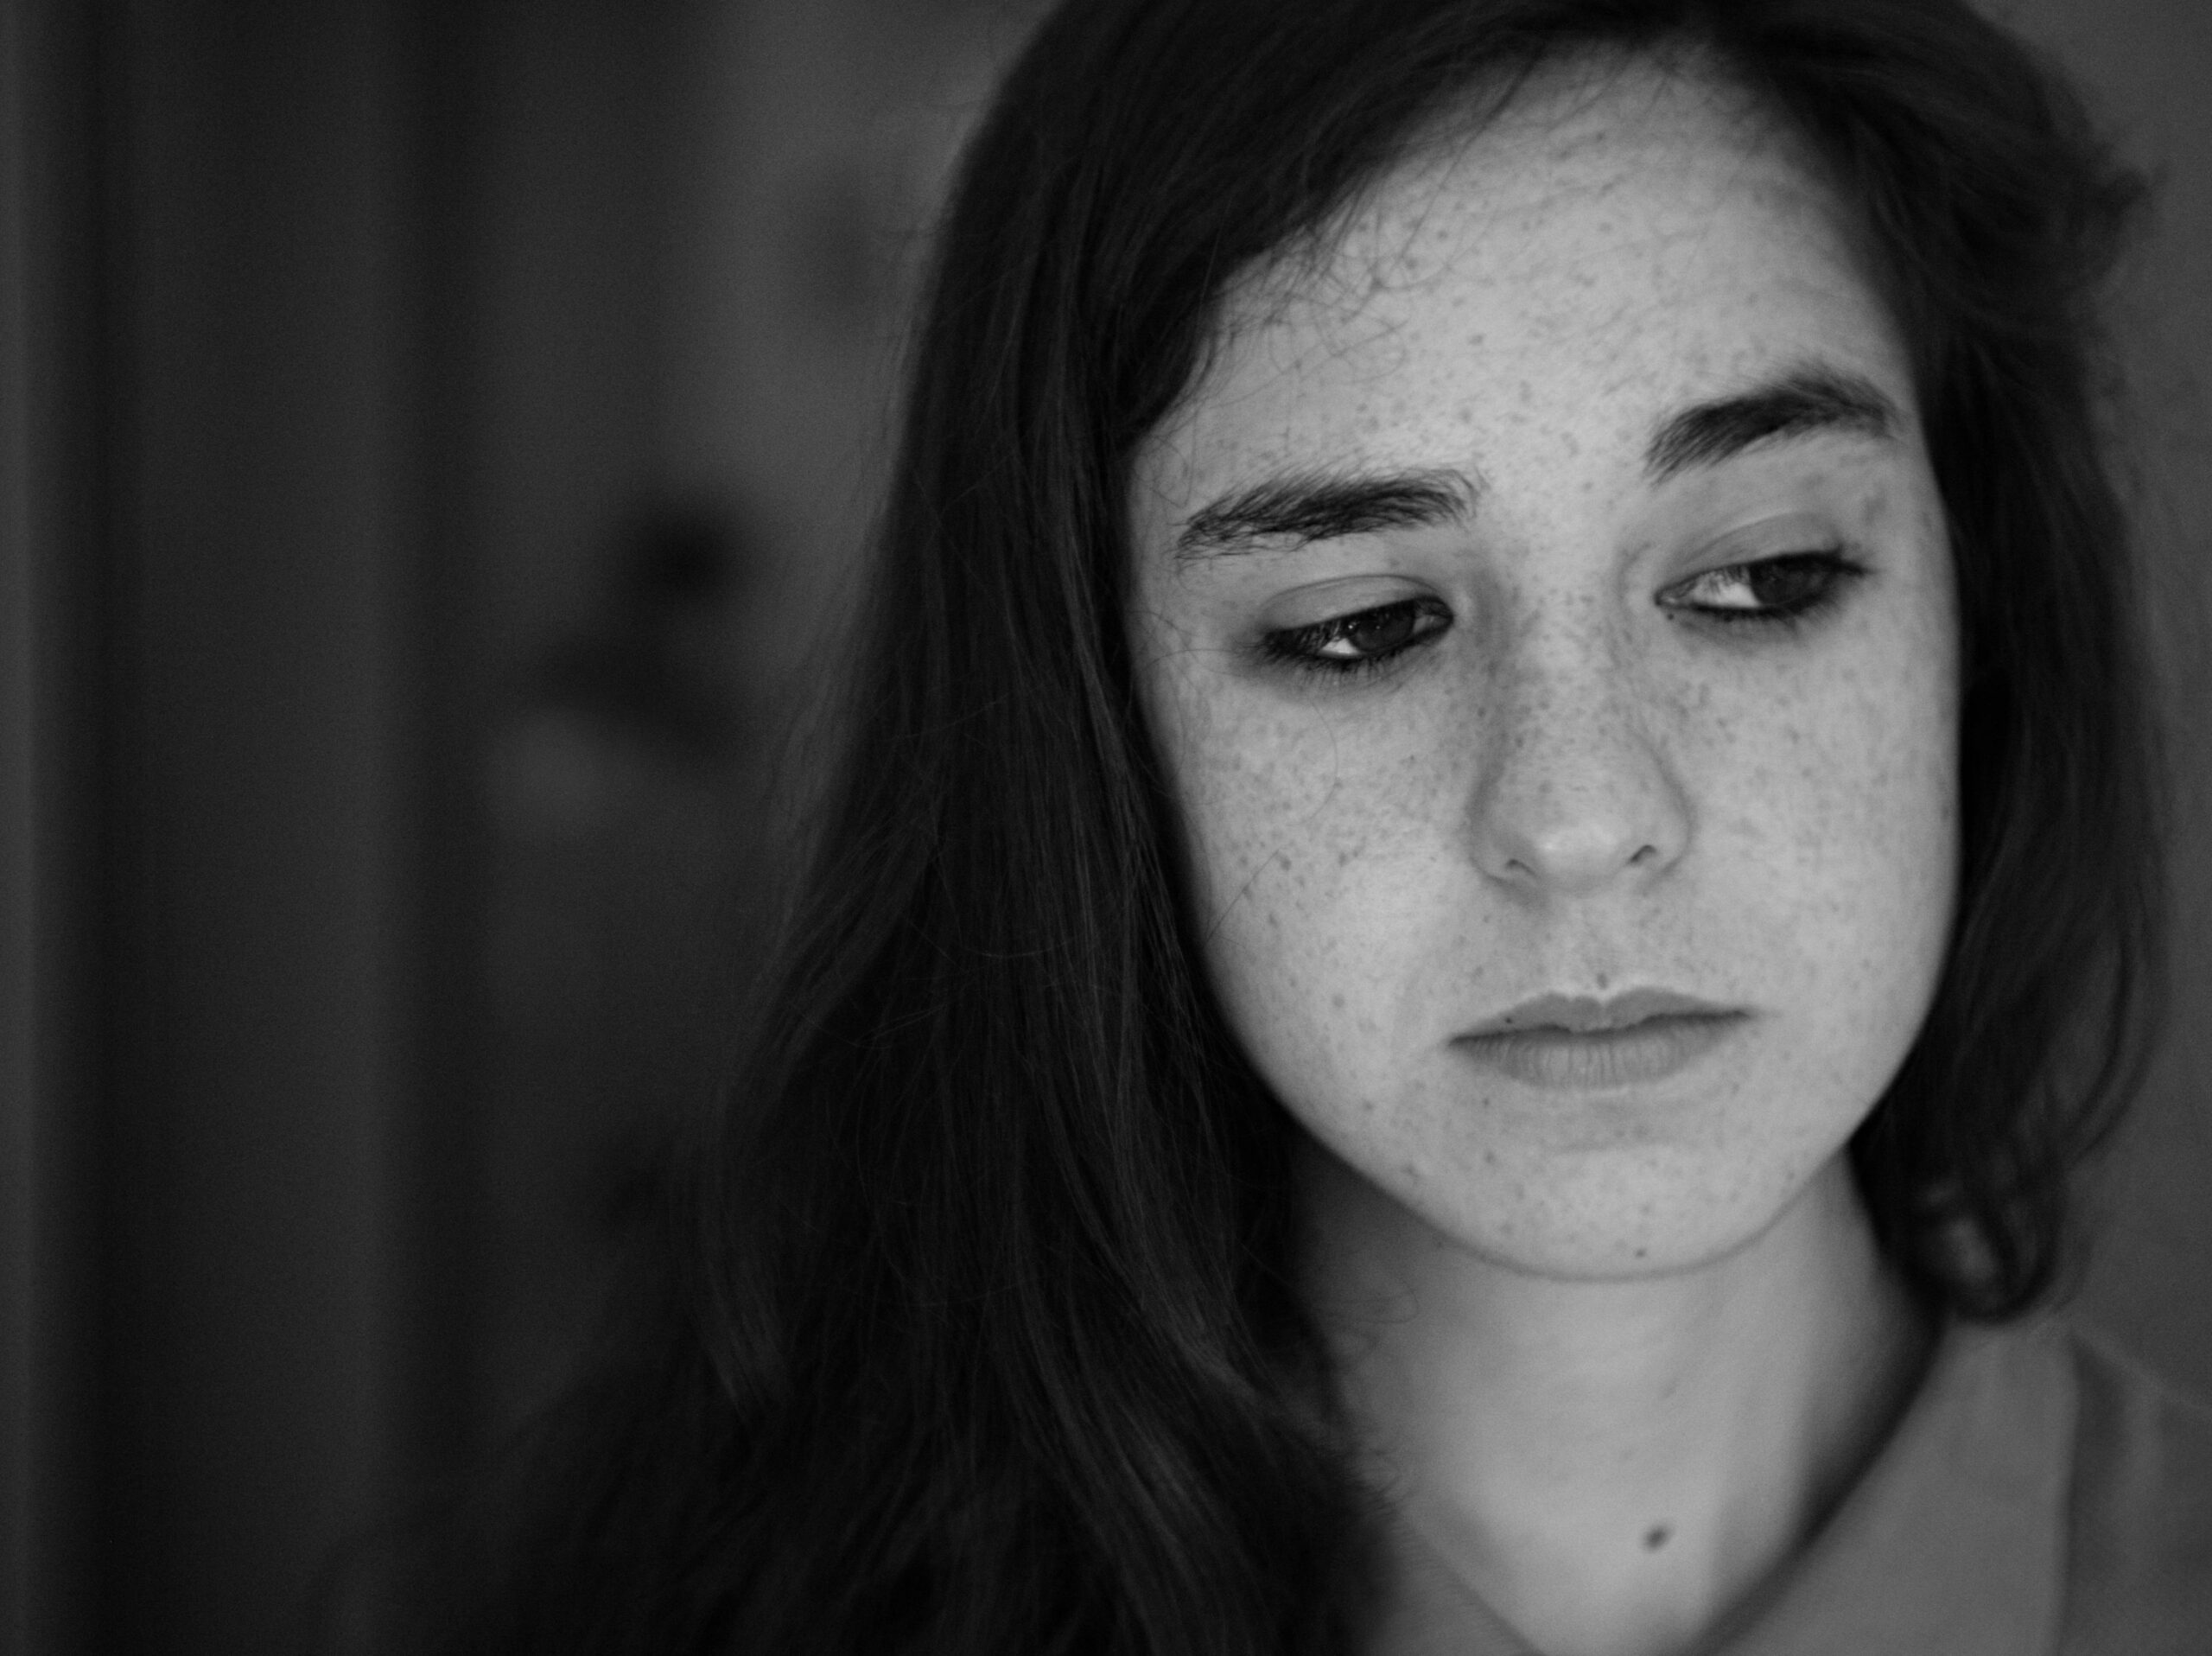 young girl looking sad | Hidden River residential eating disorder treatment center